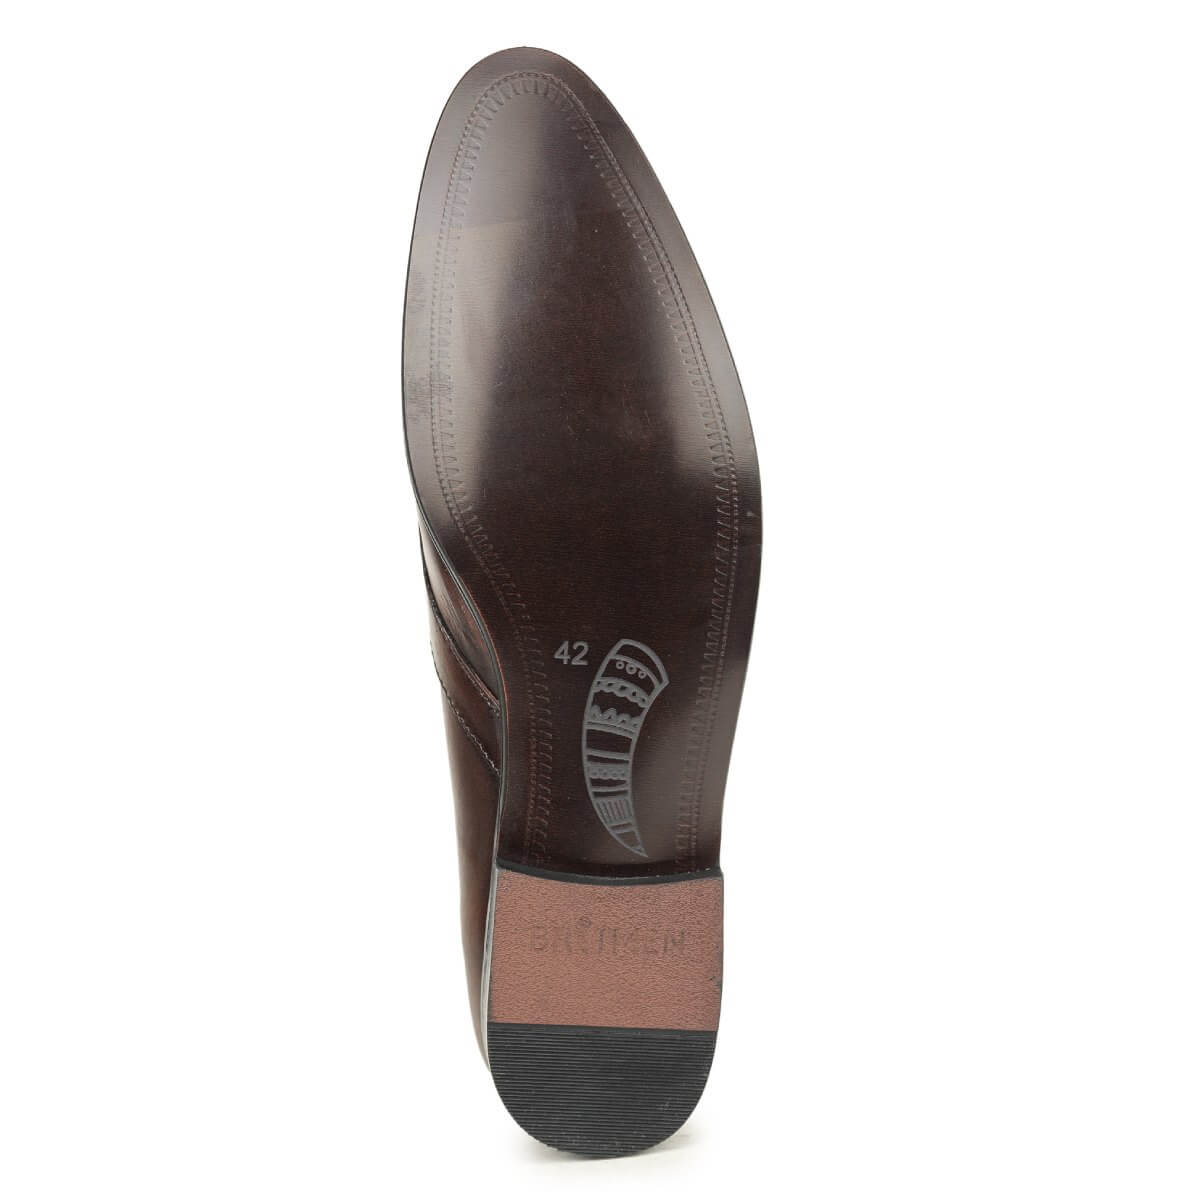 textured slip on formal shoes brown6